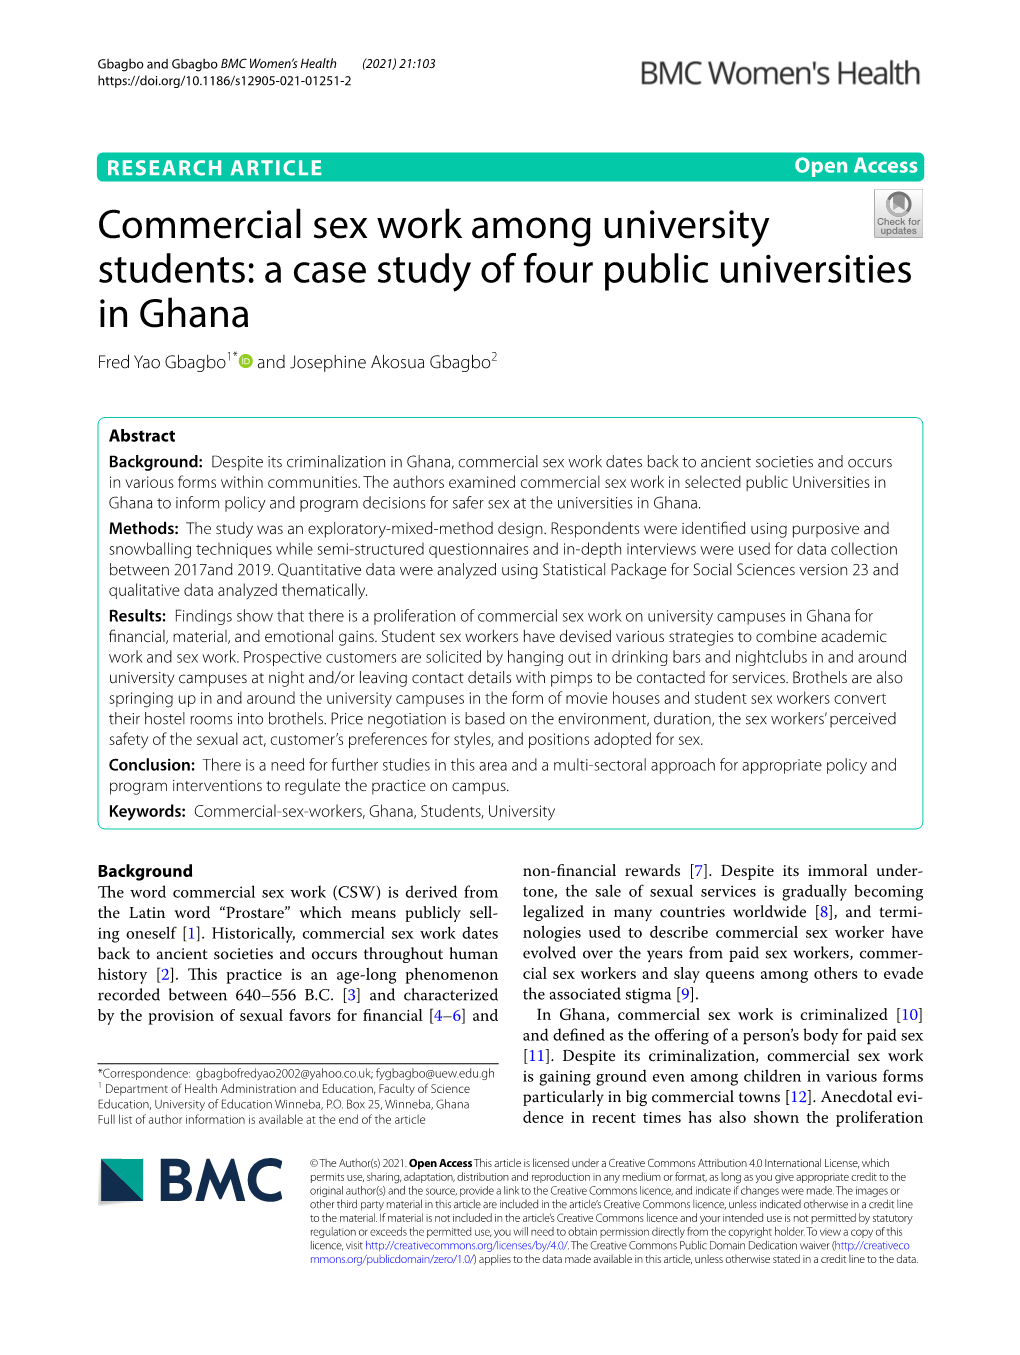 Commercial Sex Work Among University Students: a Case Study of Four Public Universities in Ghana Fred Yao Gbagbo1* and Josephine Akosua Gbagbo2